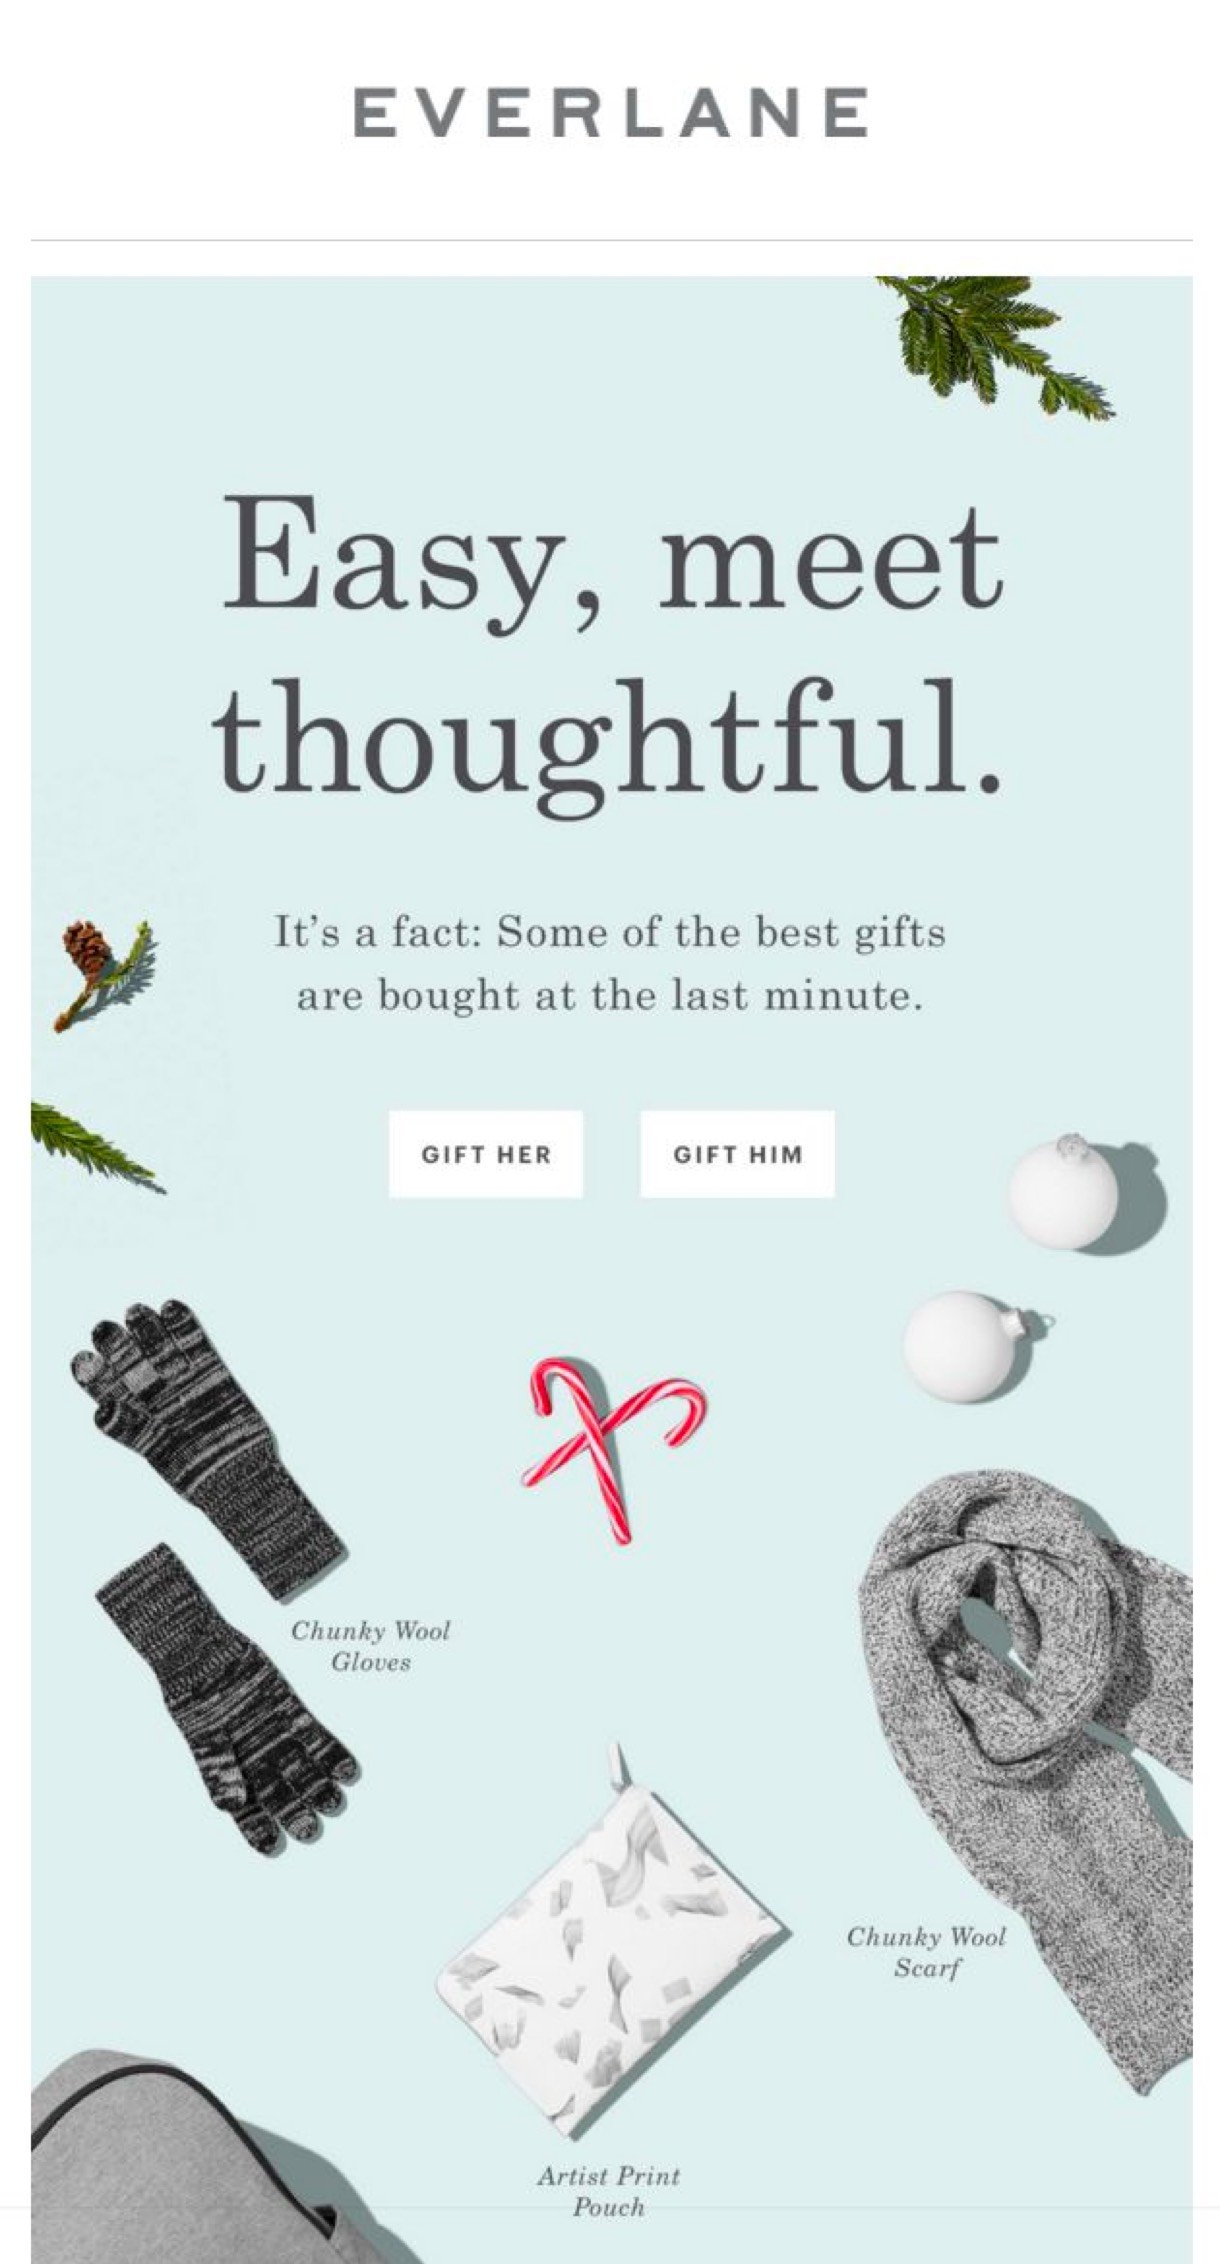 Everlane Christmas newsletter example mint background winter accessories